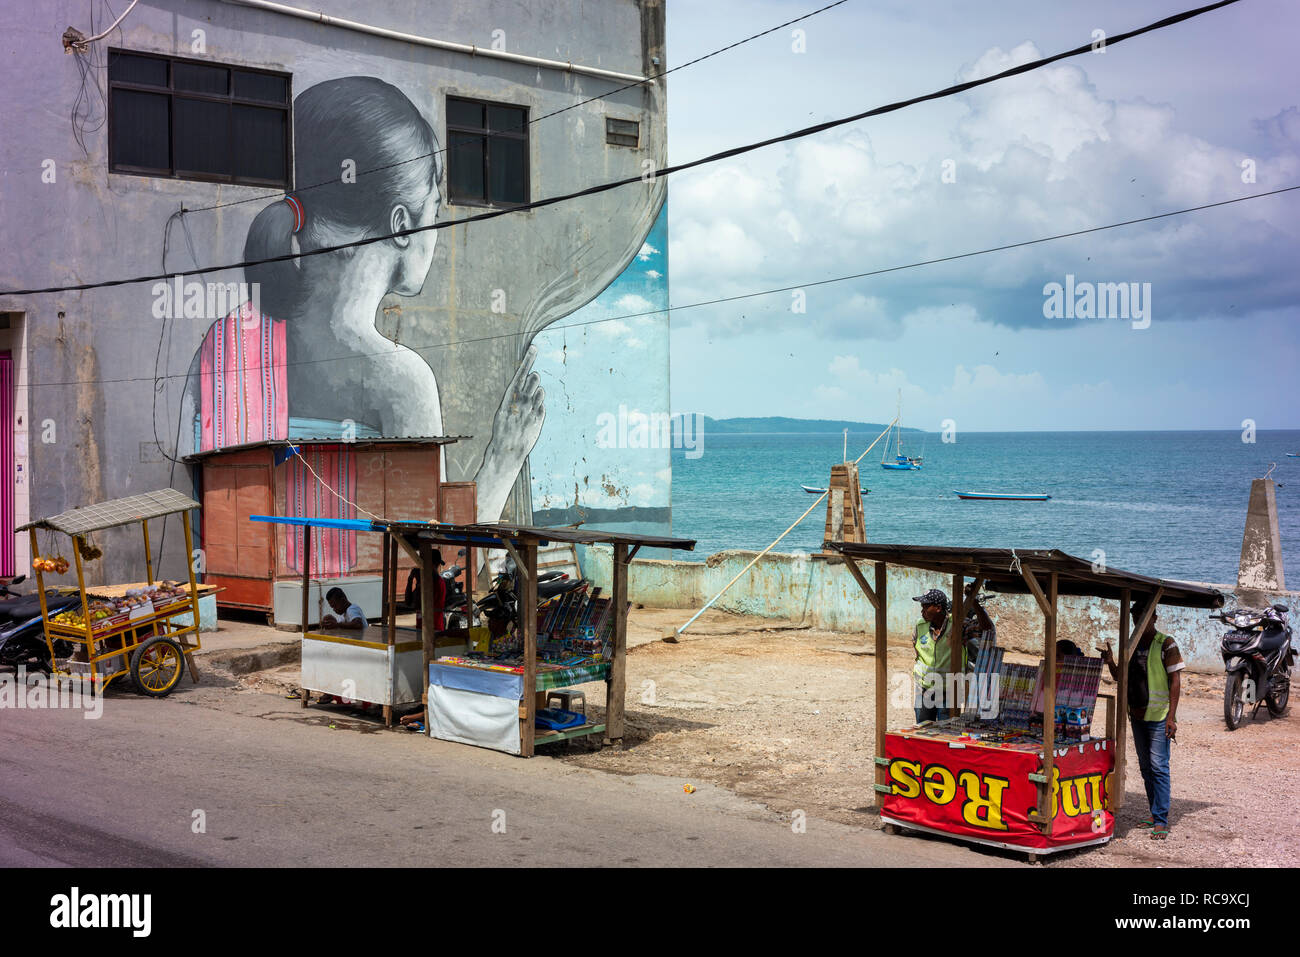 In central Kupang, a mural shows a young woman looking out over the ocean. Stock Photo